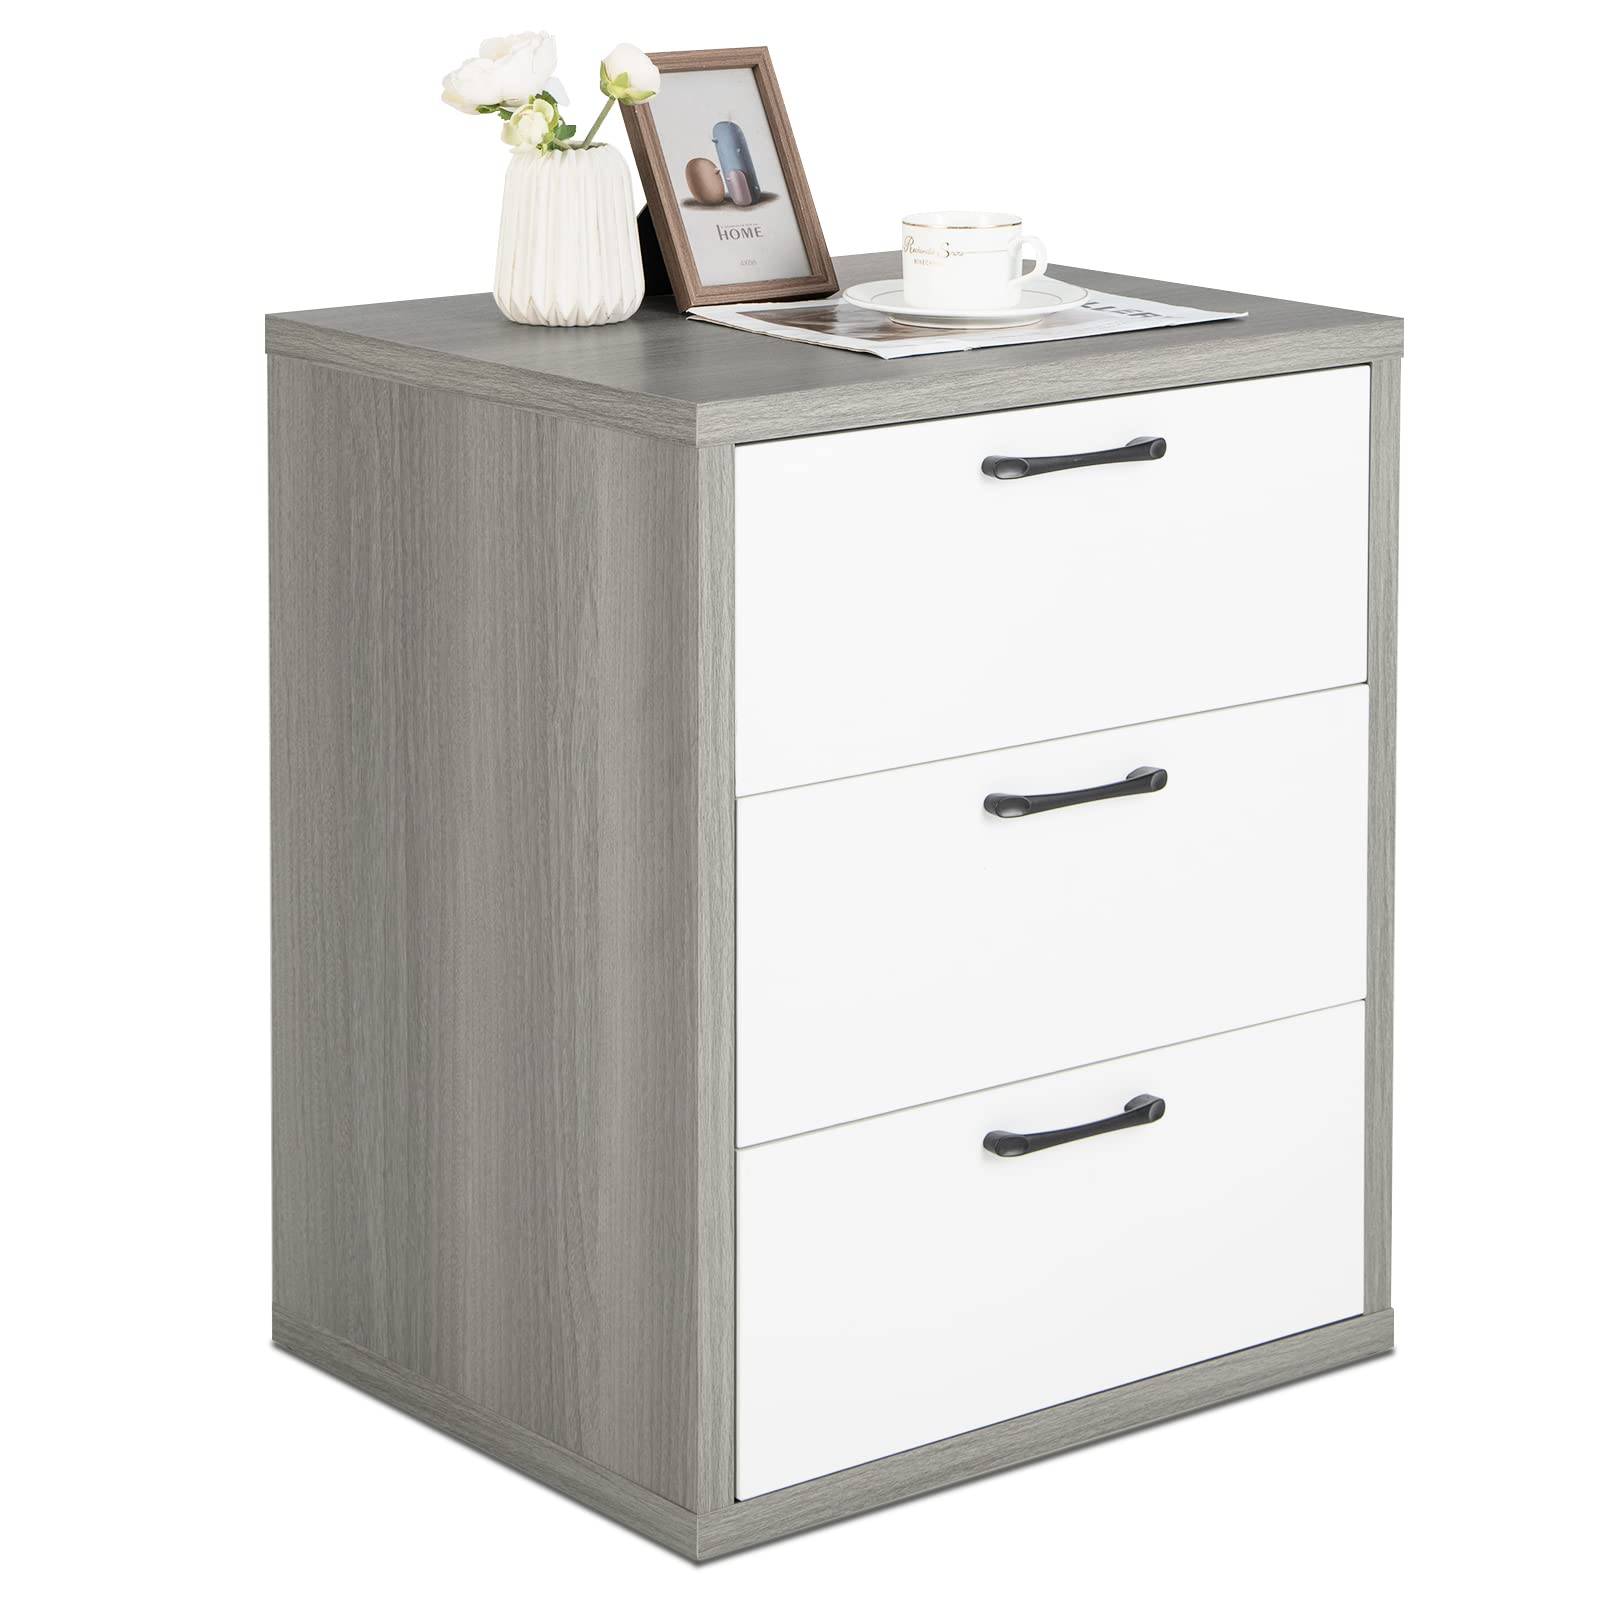 Giantex Storage Drawer Dresser - Wood End Table, Night Stand with 3 Drawers (1, White & Gray)